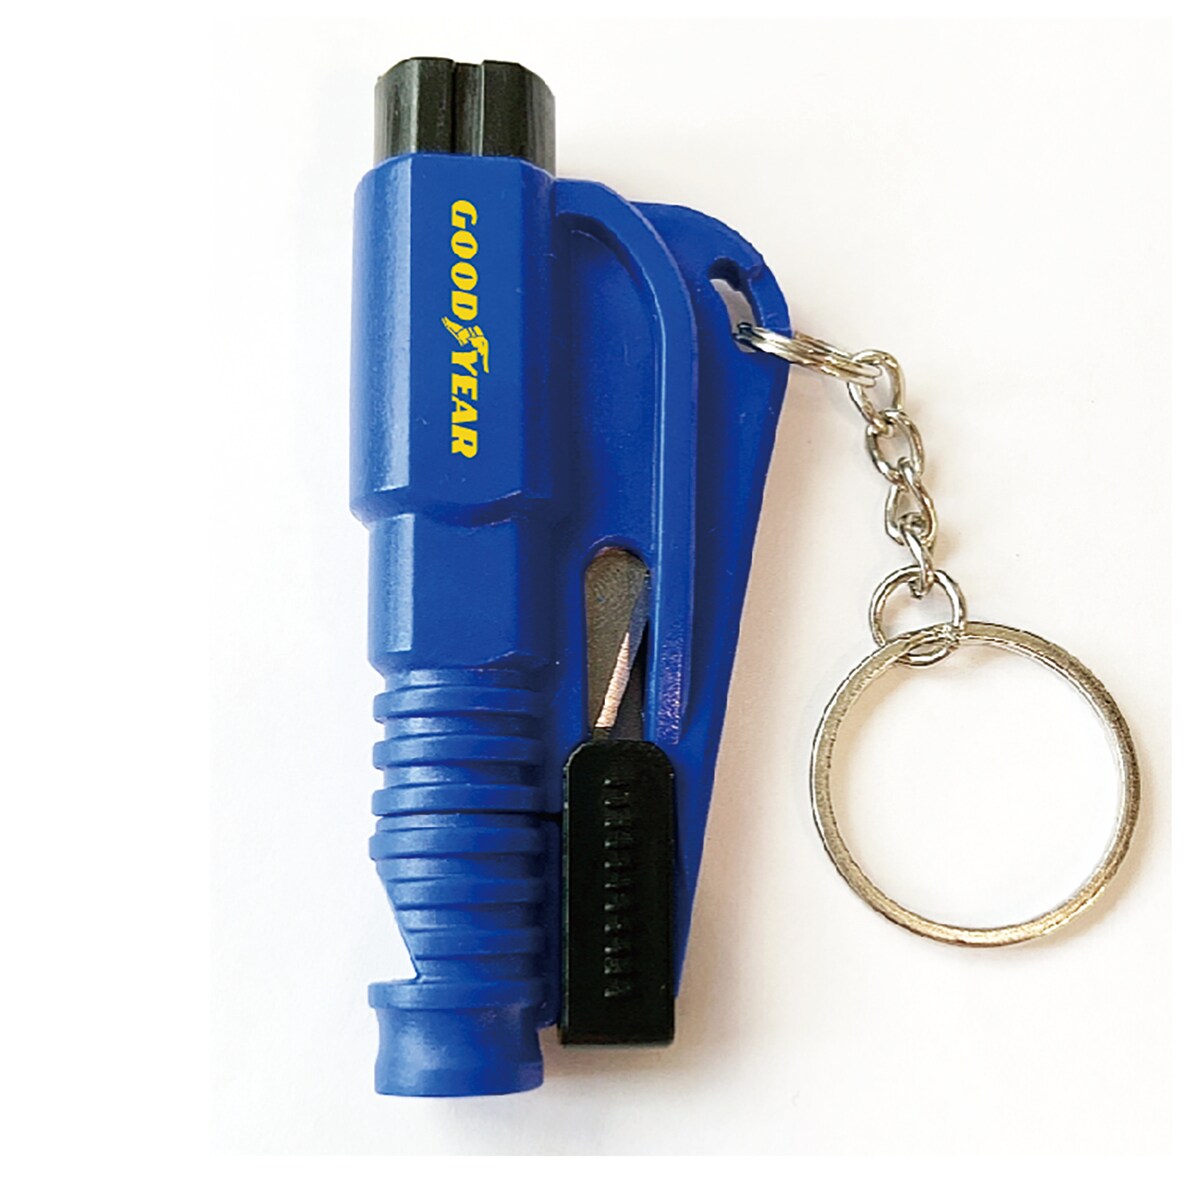 Goodyear Goodyear 4 In 1 Emergency Escape Tool Gy3198 Spring Loaded Window  Breaker and Seat Belt Cutter Keyring with Safety Whistle in the Safety  Accessories department at